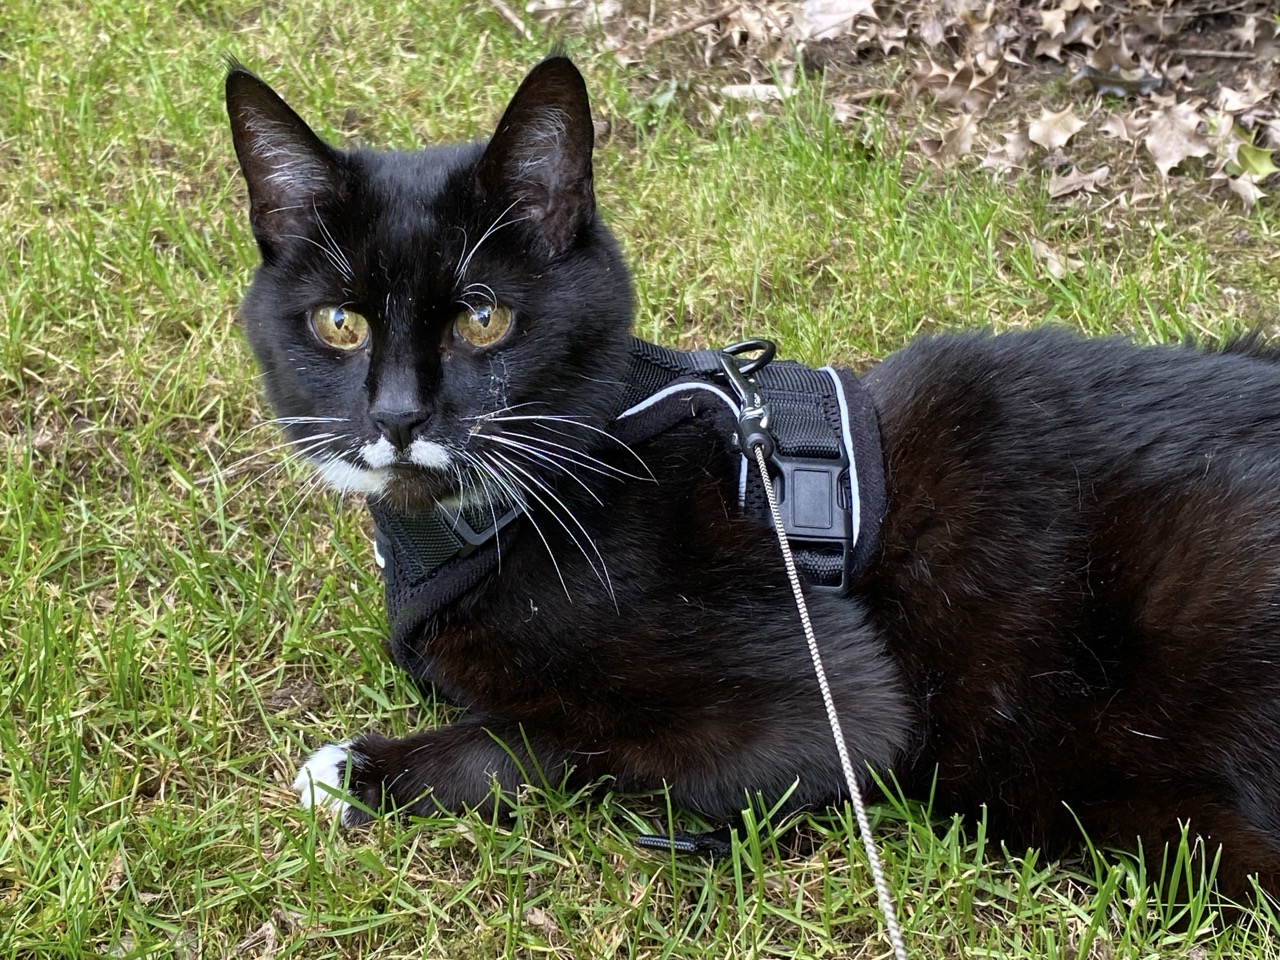 A black and white cat sitting on some grass, wearing a harness and lead